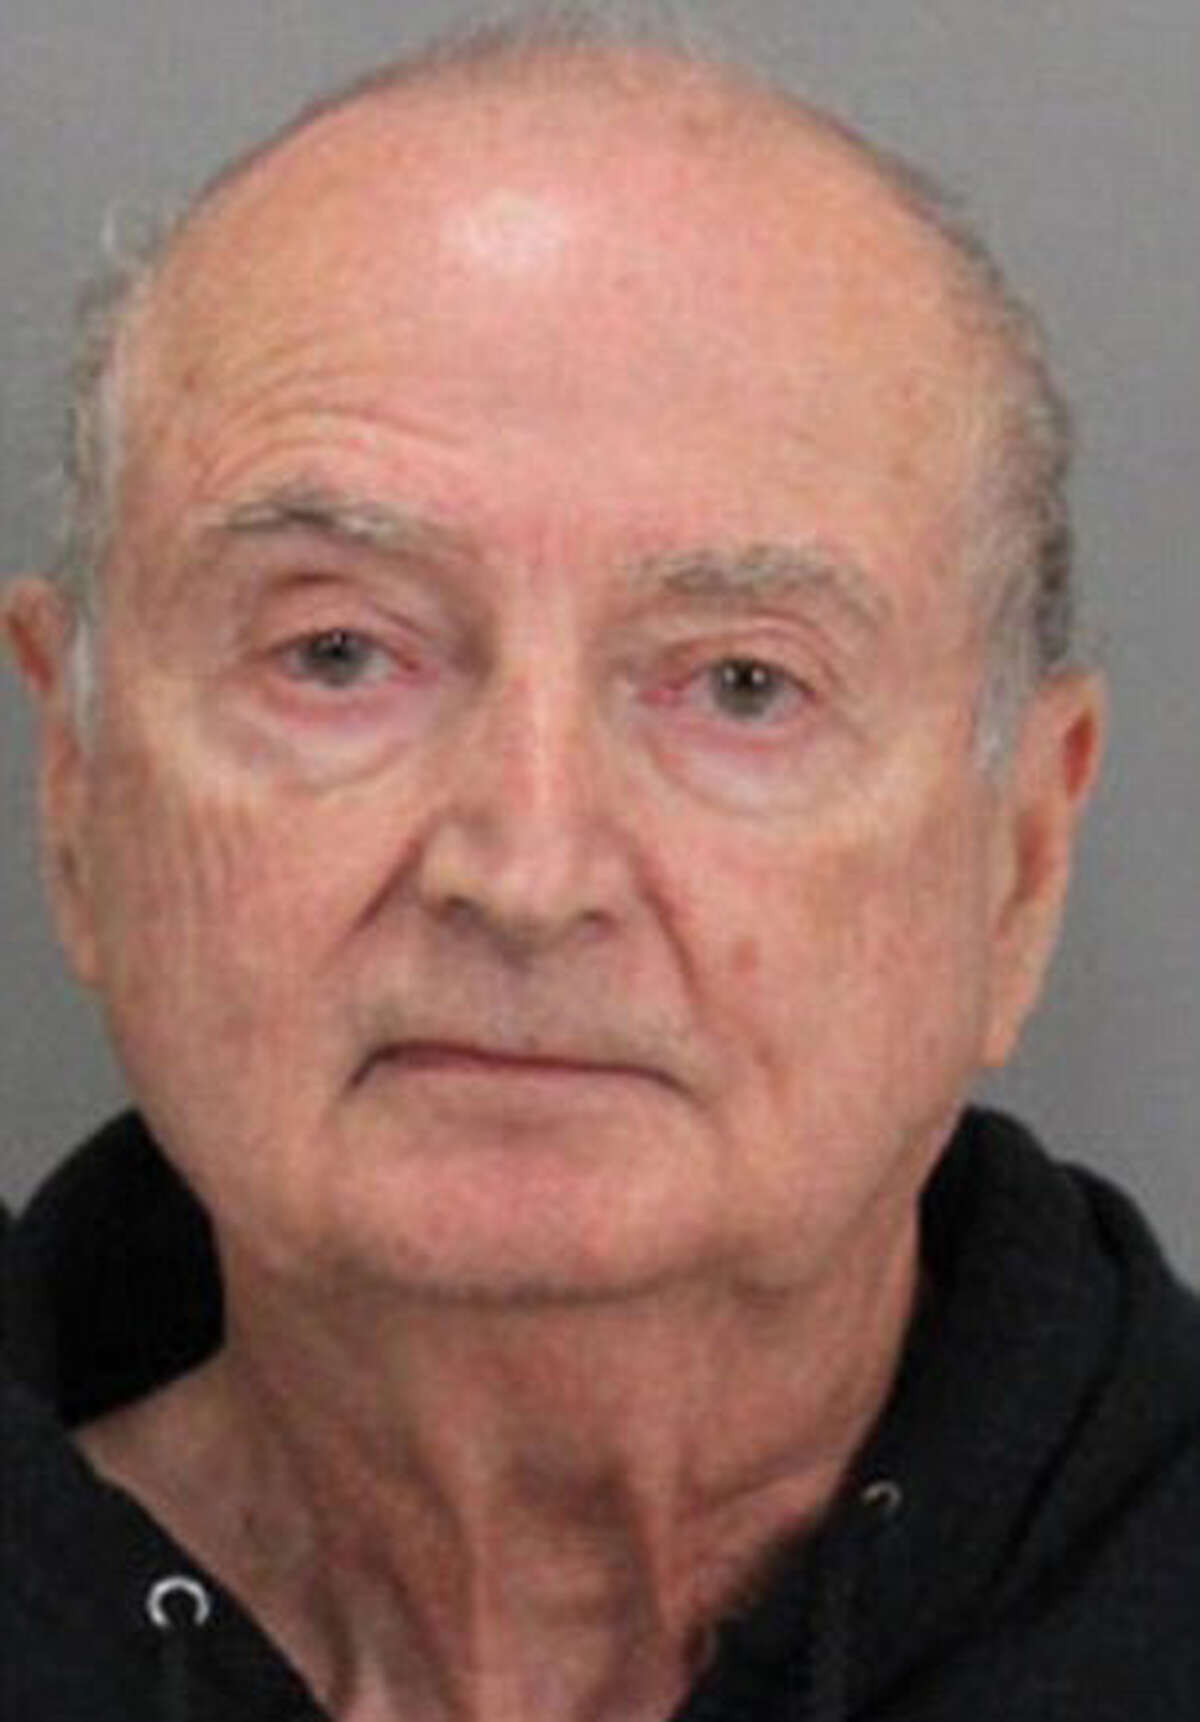 Ralph Flynn has been accused of sexually molesting his adopted son Denis Flynn.